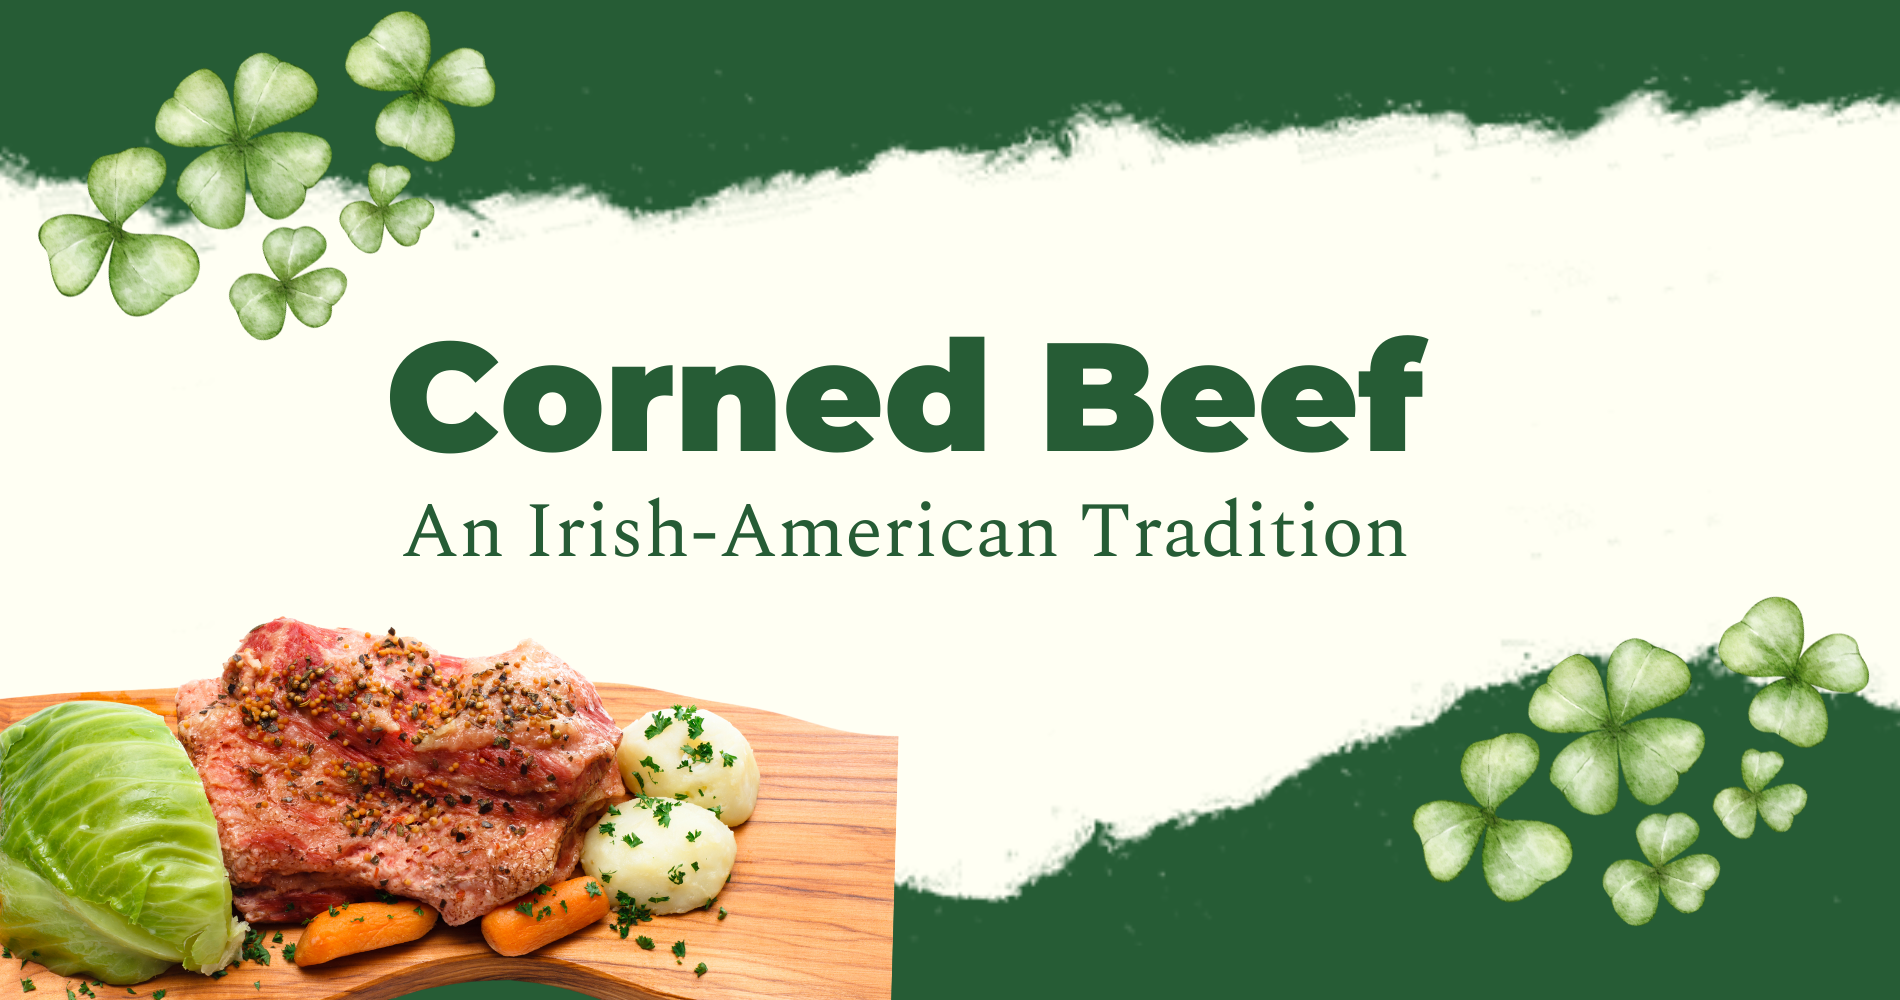 This is Corned Beef: An Old Irish-American Tradition image